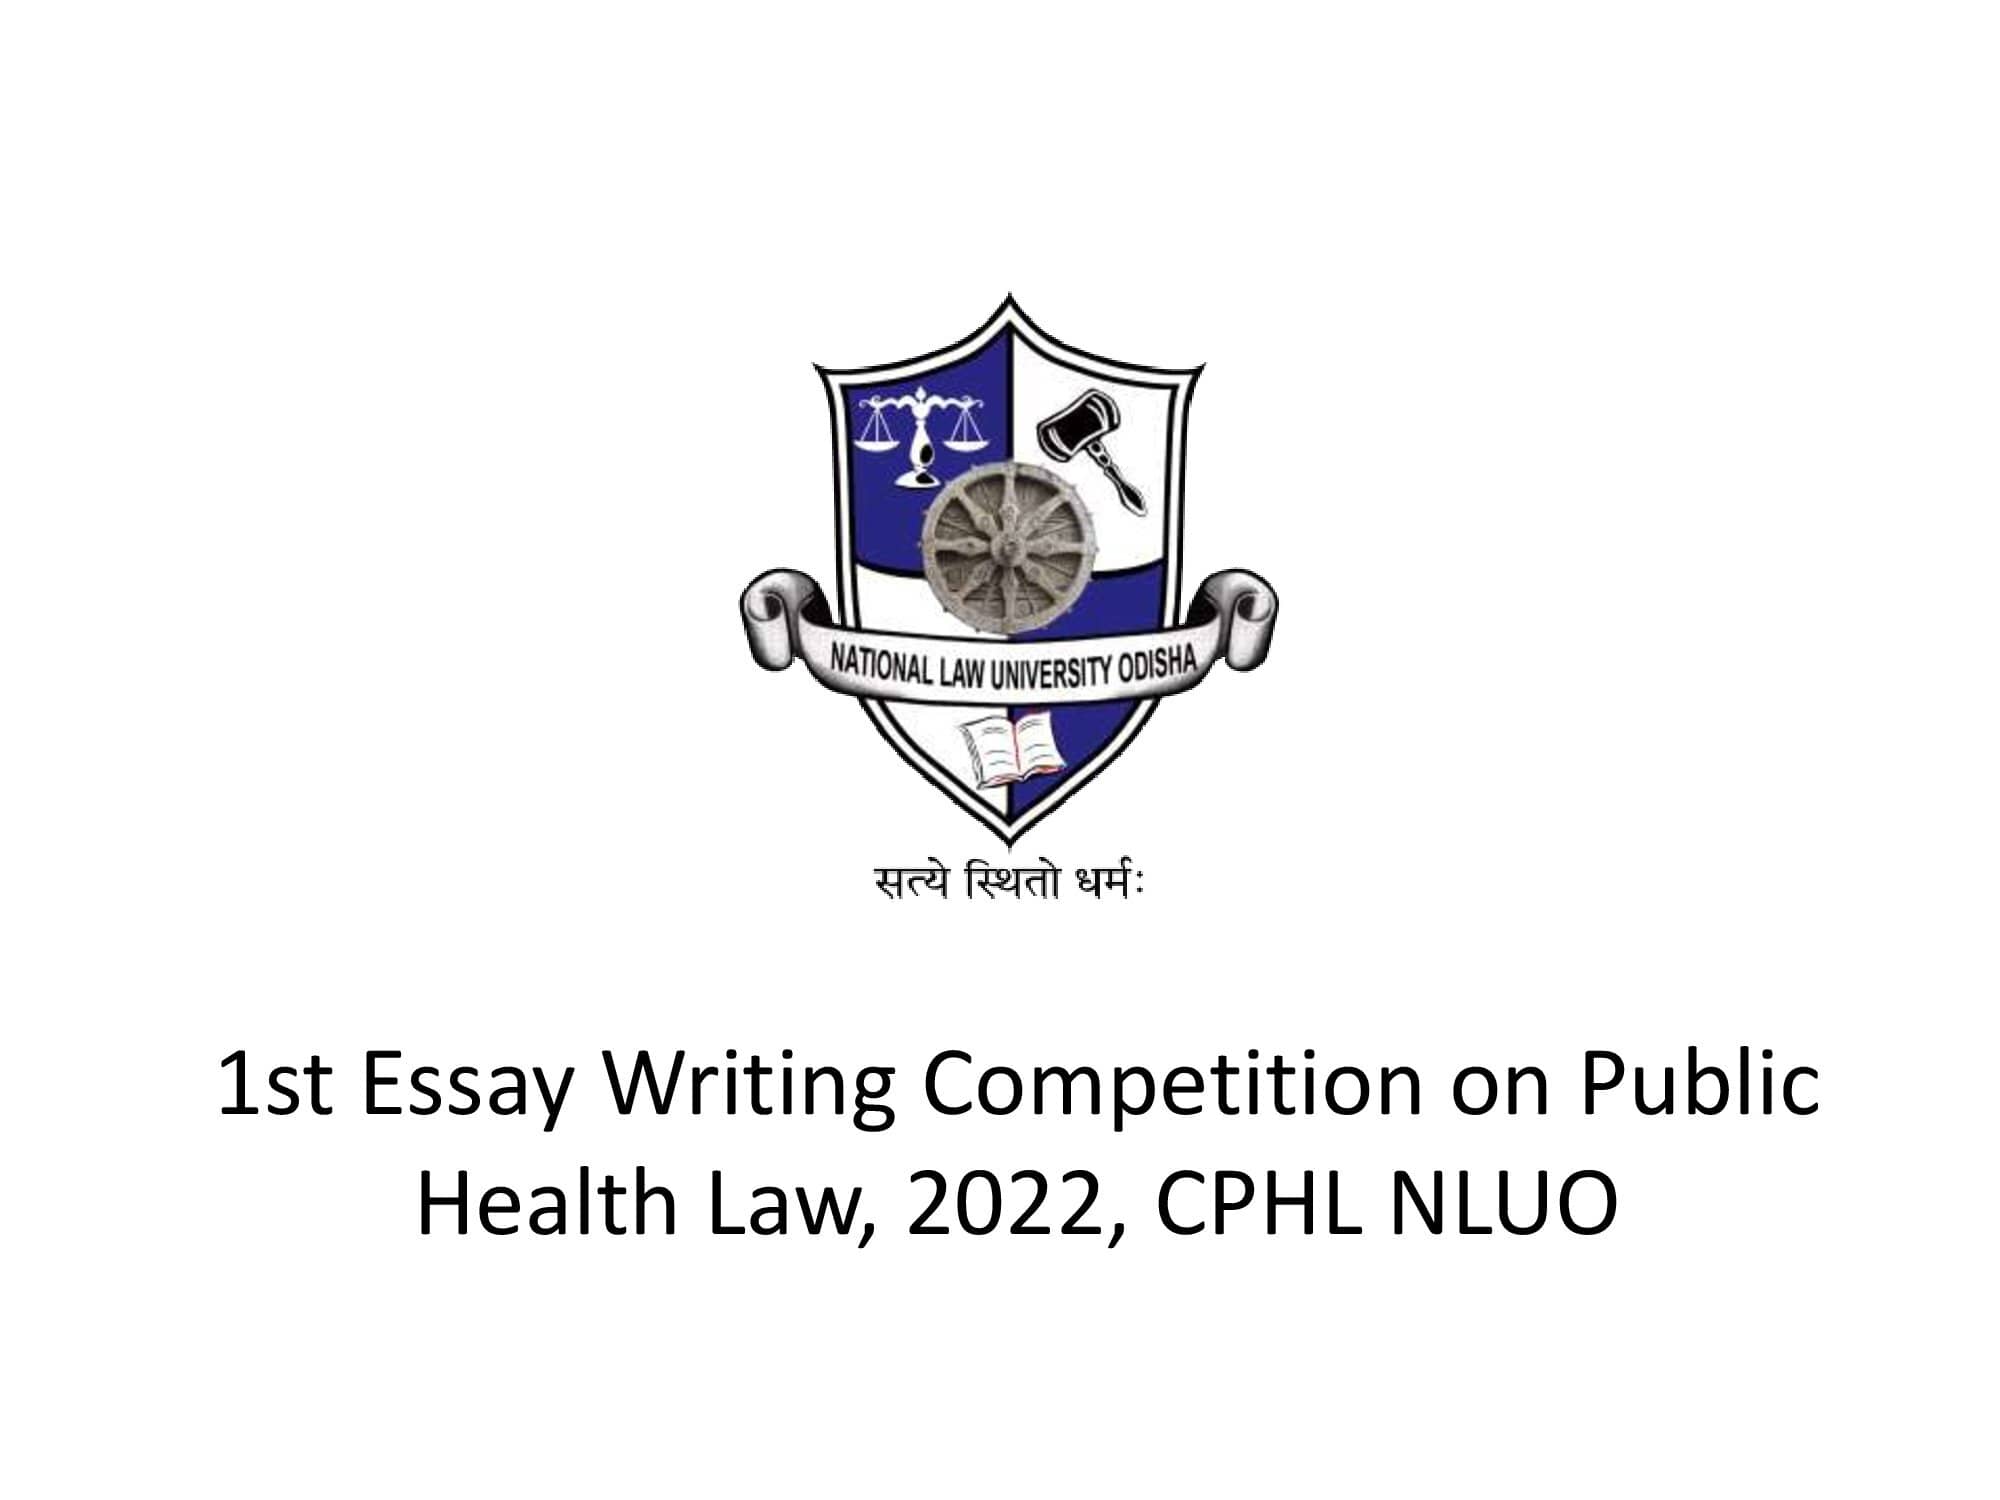 1st Essay Writing Competition on Public Health Law, 2022, CPHL NLUO